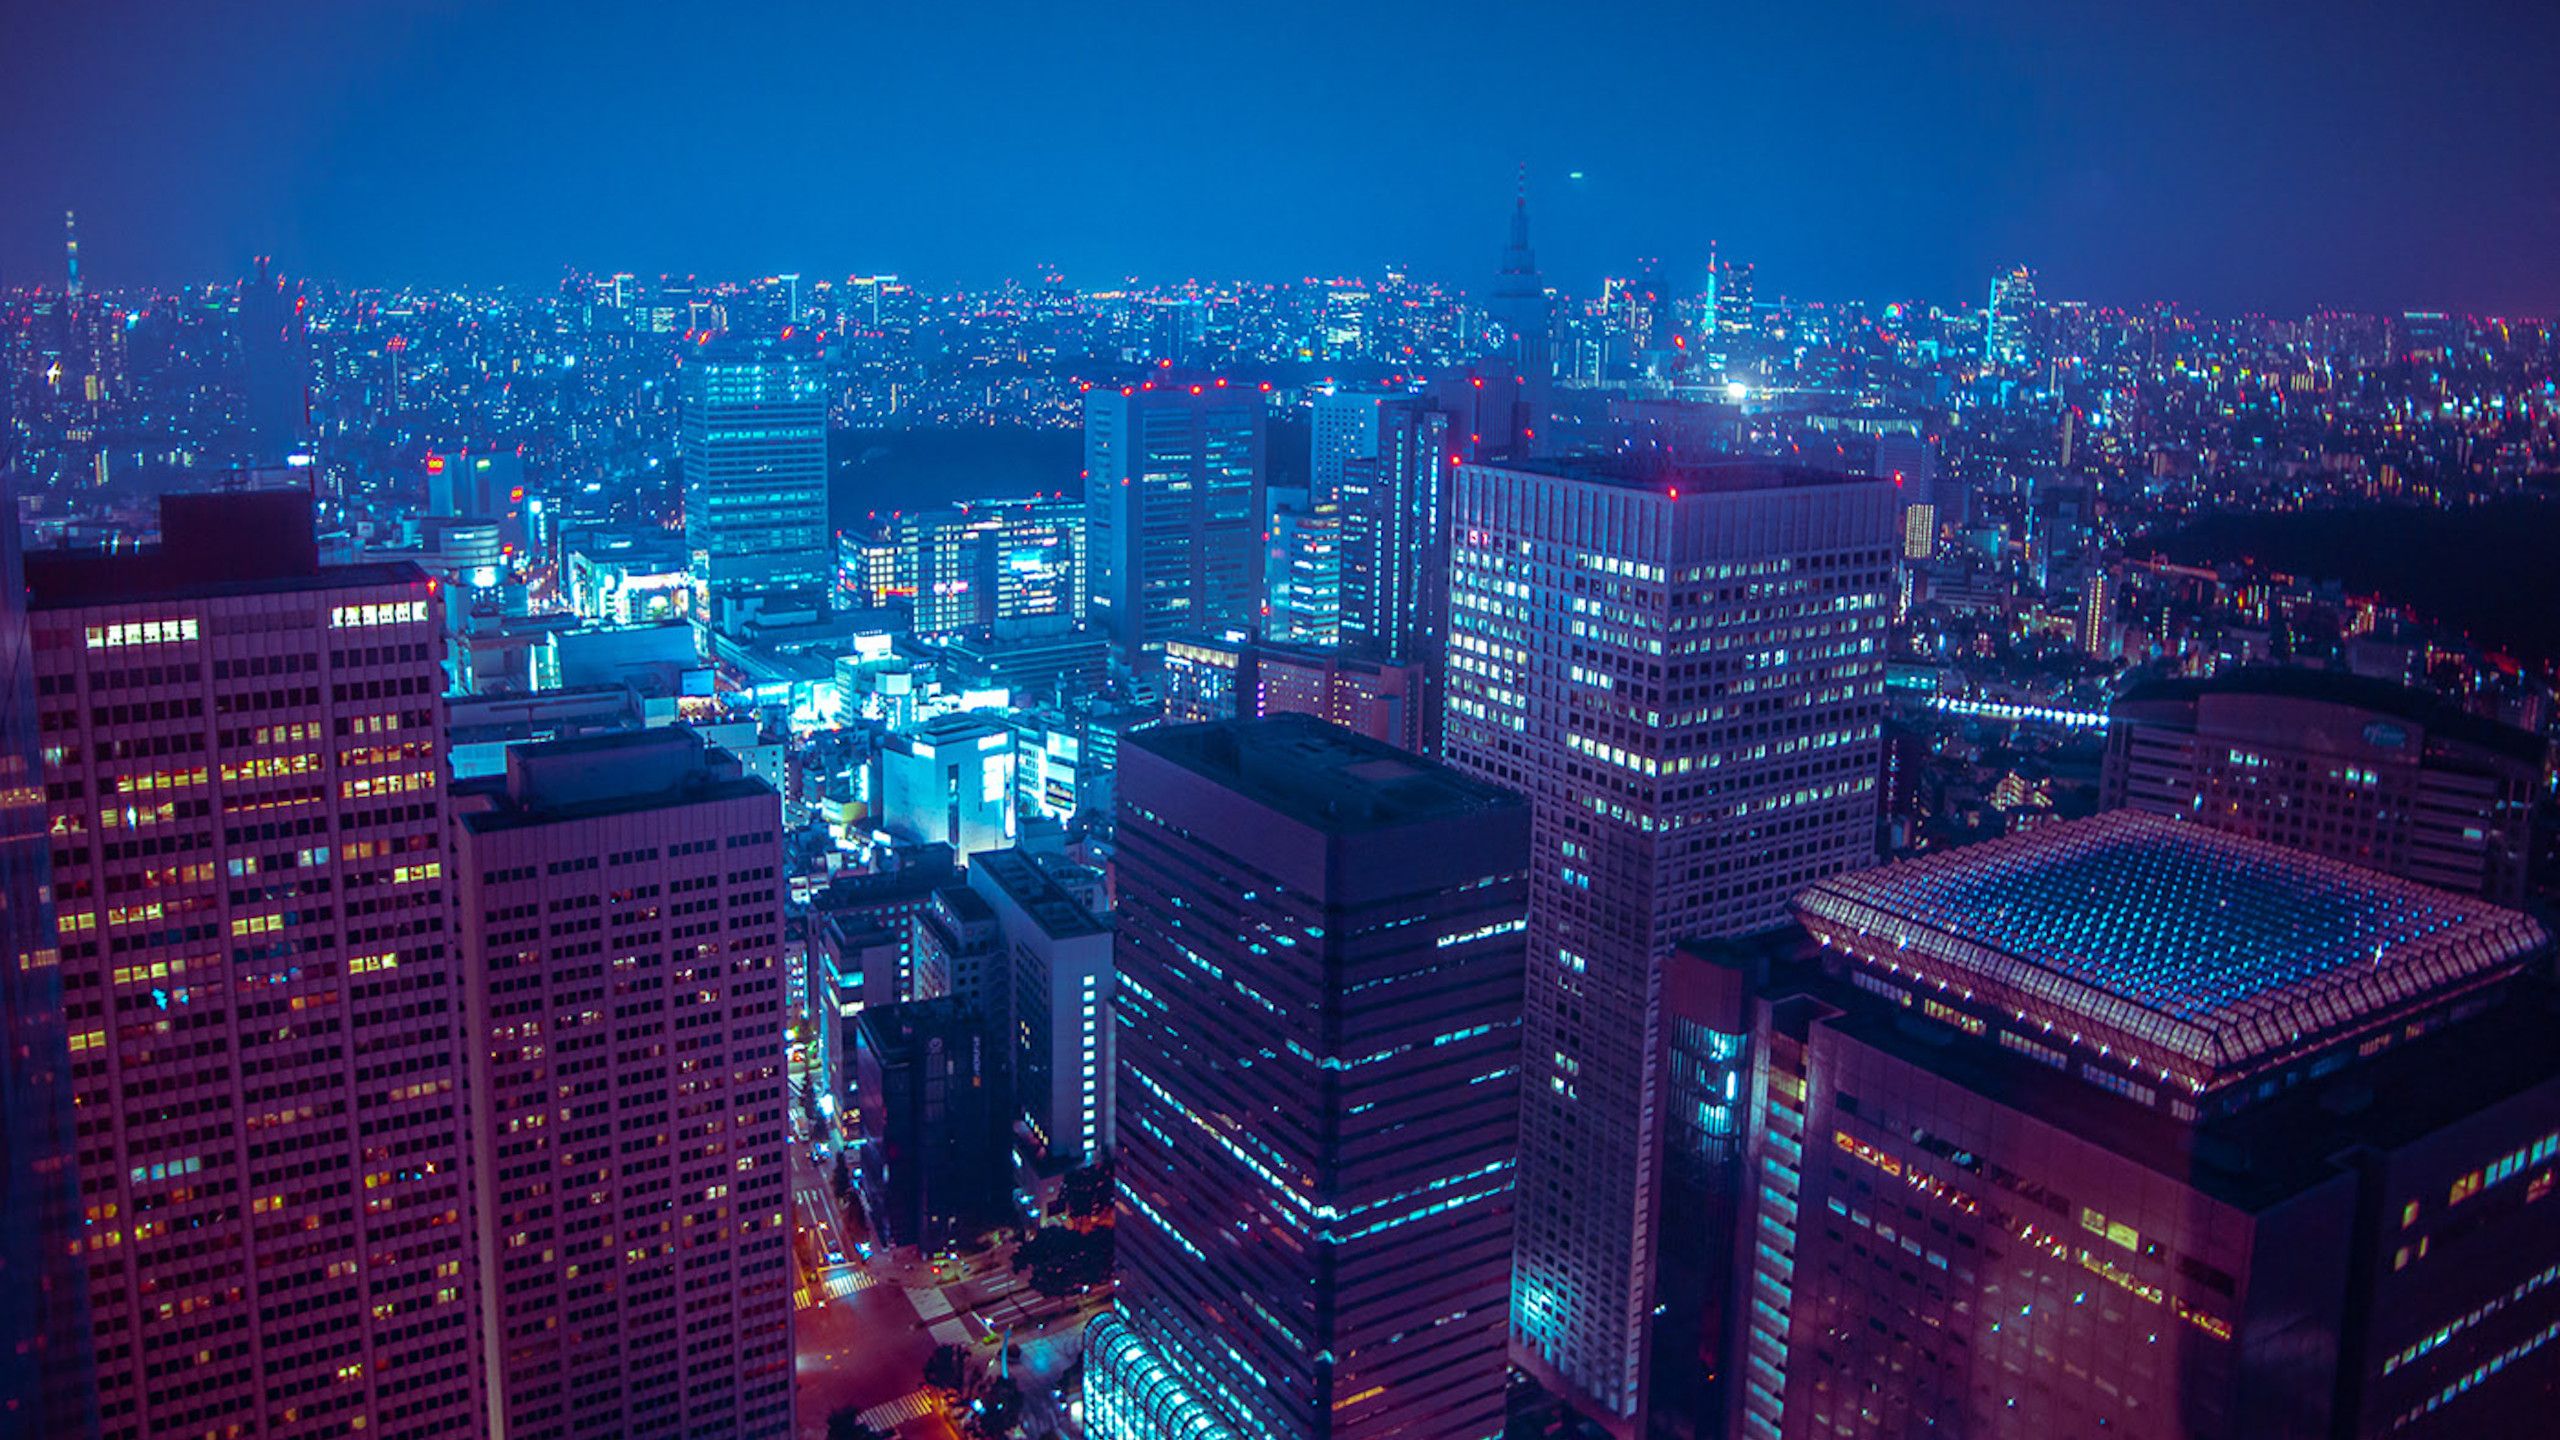 A cityscape at night with blue and purple hues - Neon, Japan